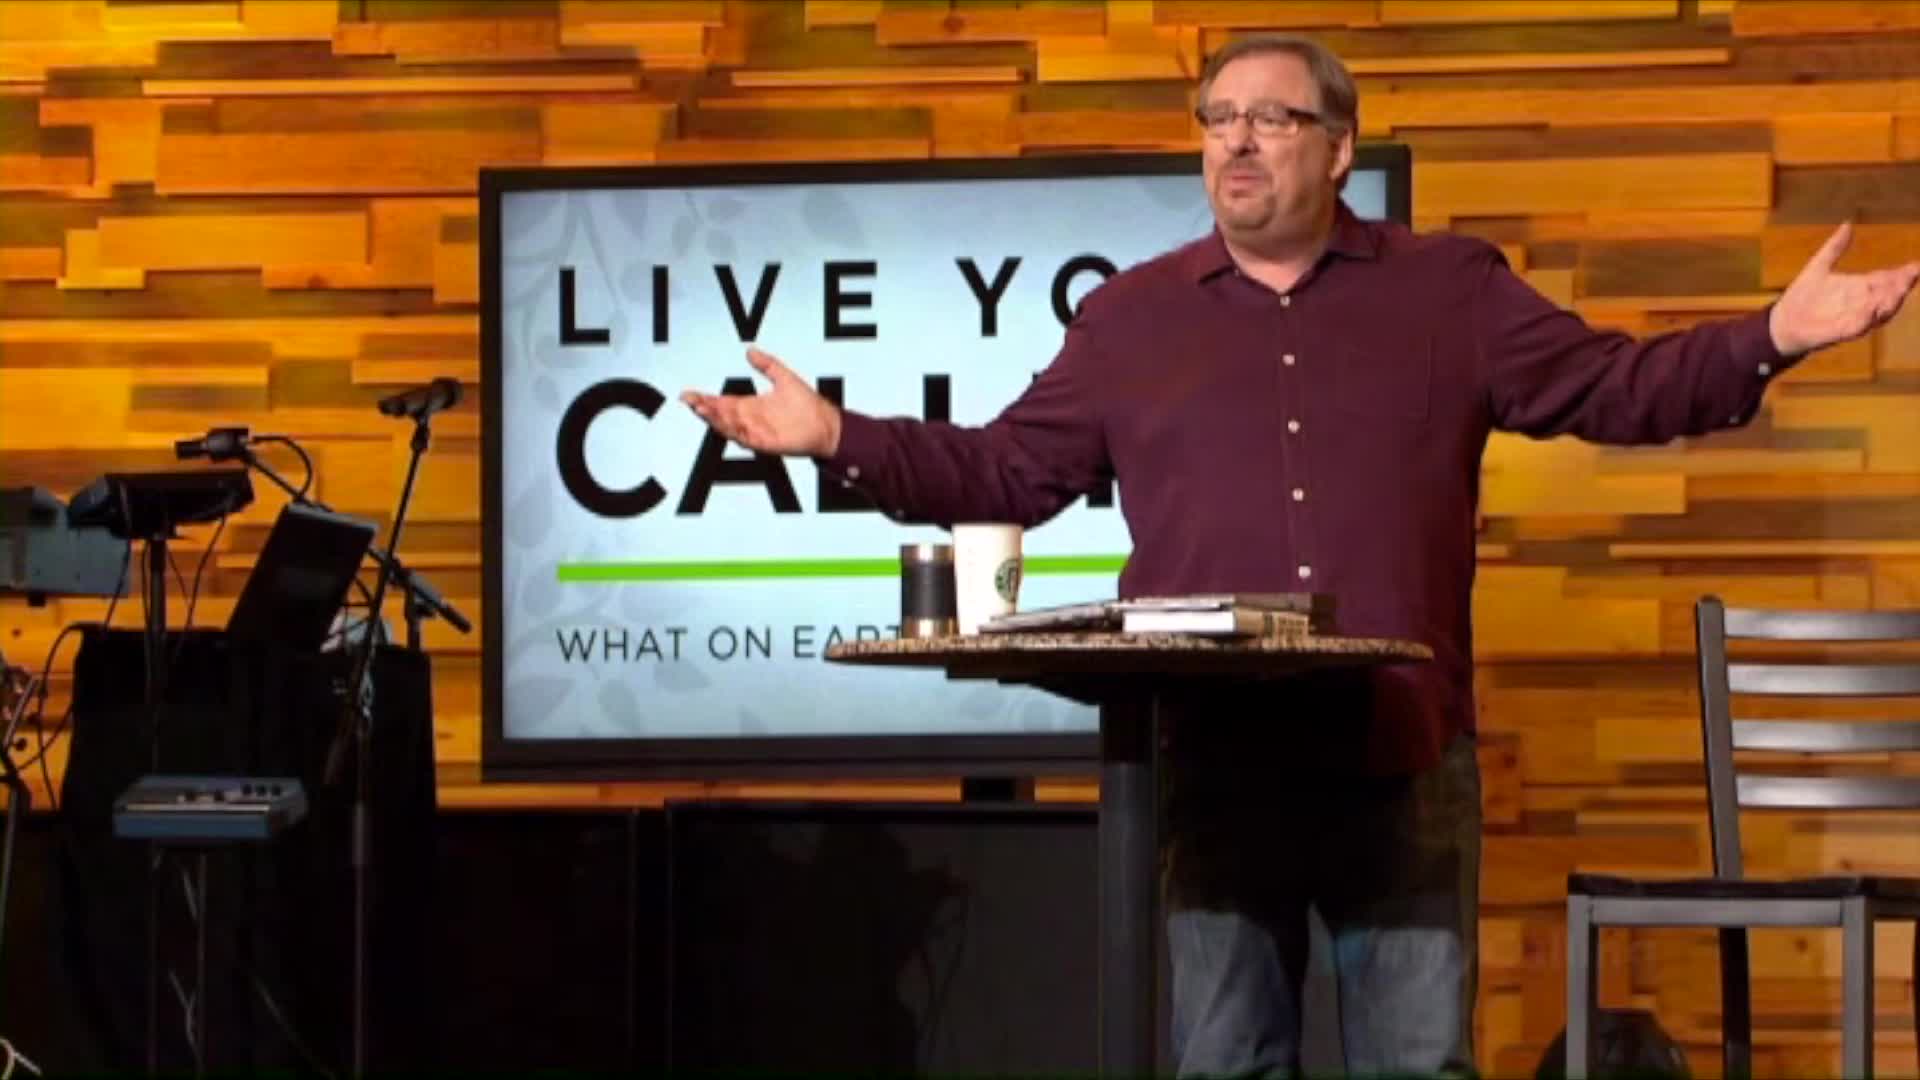 What is the Church? (Live Your Calling)